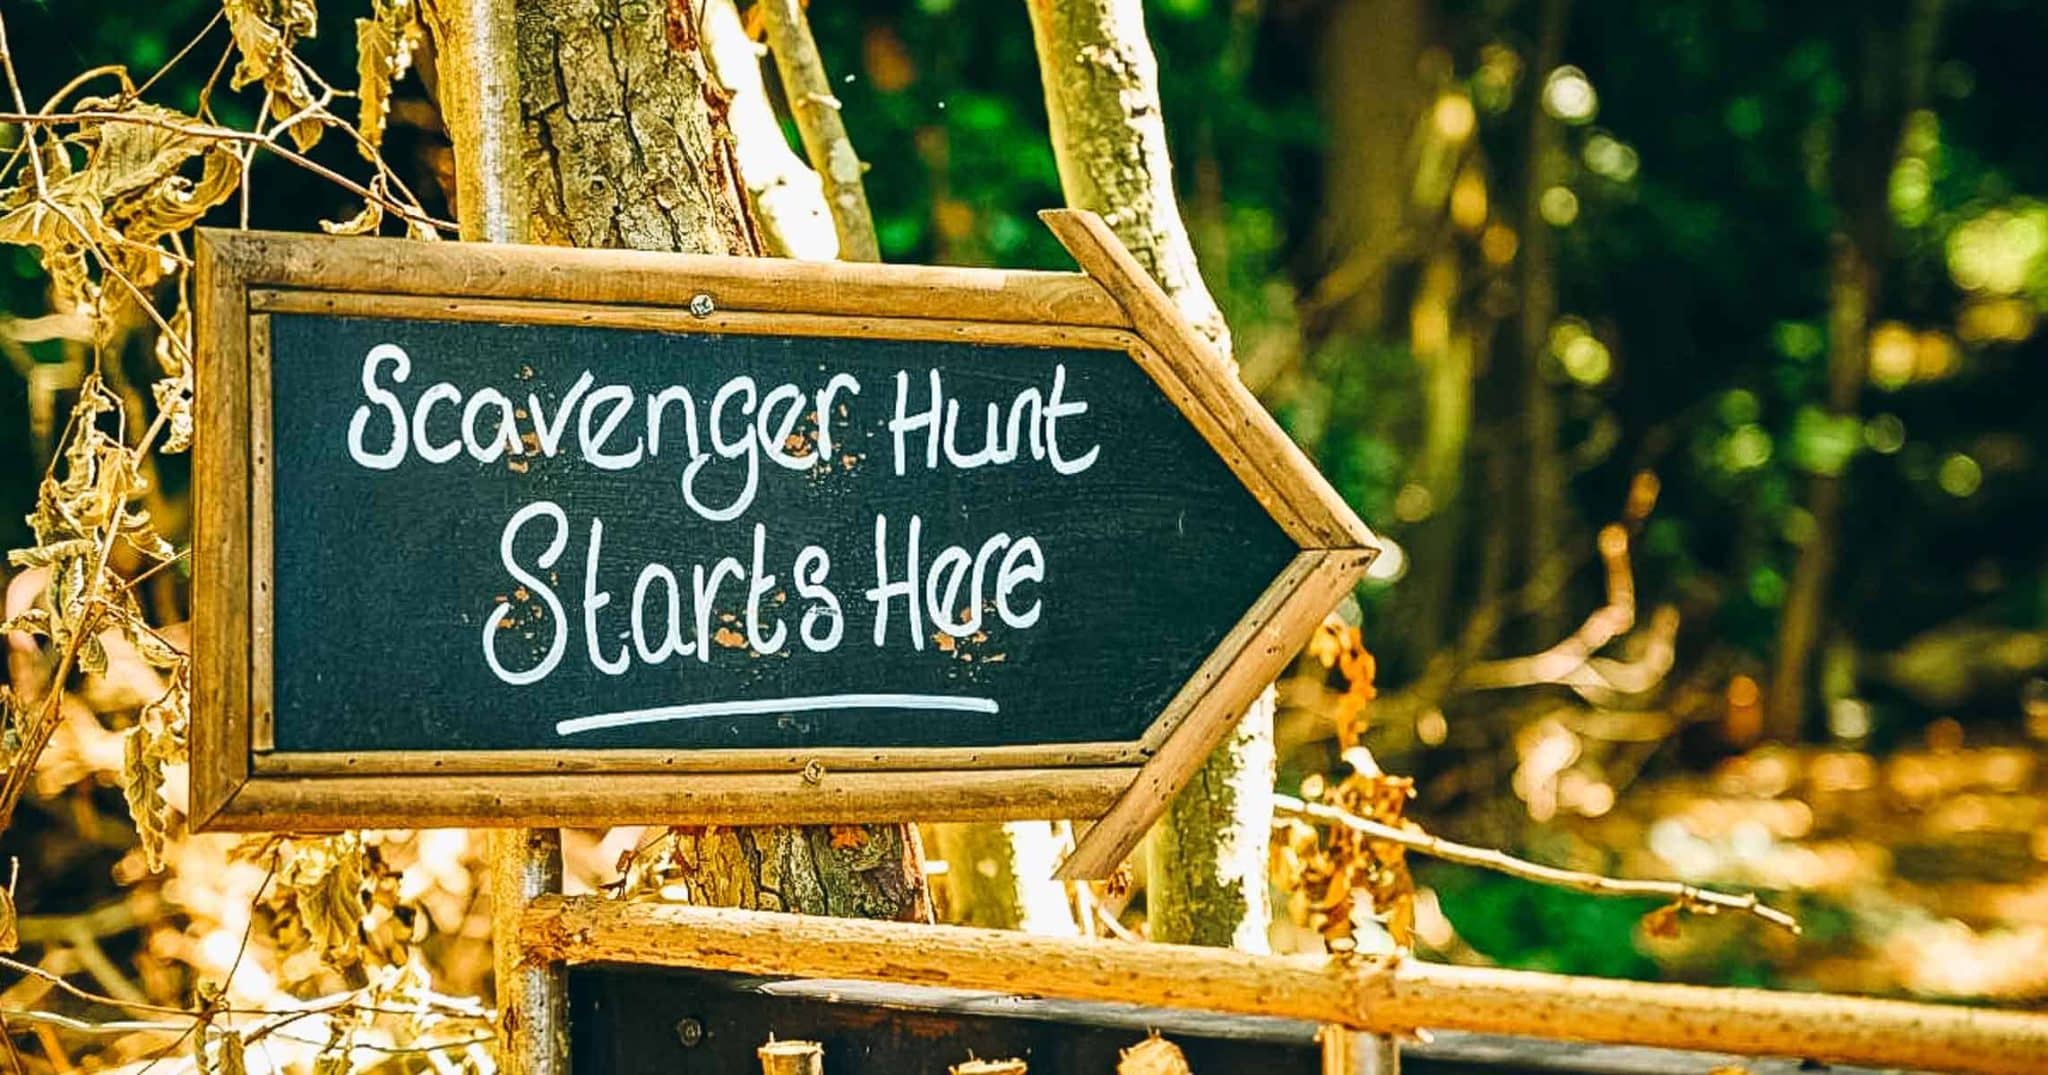 A rustic wooden sign amidst trees, guiding guests to a wedding ceremony surrounded by nature